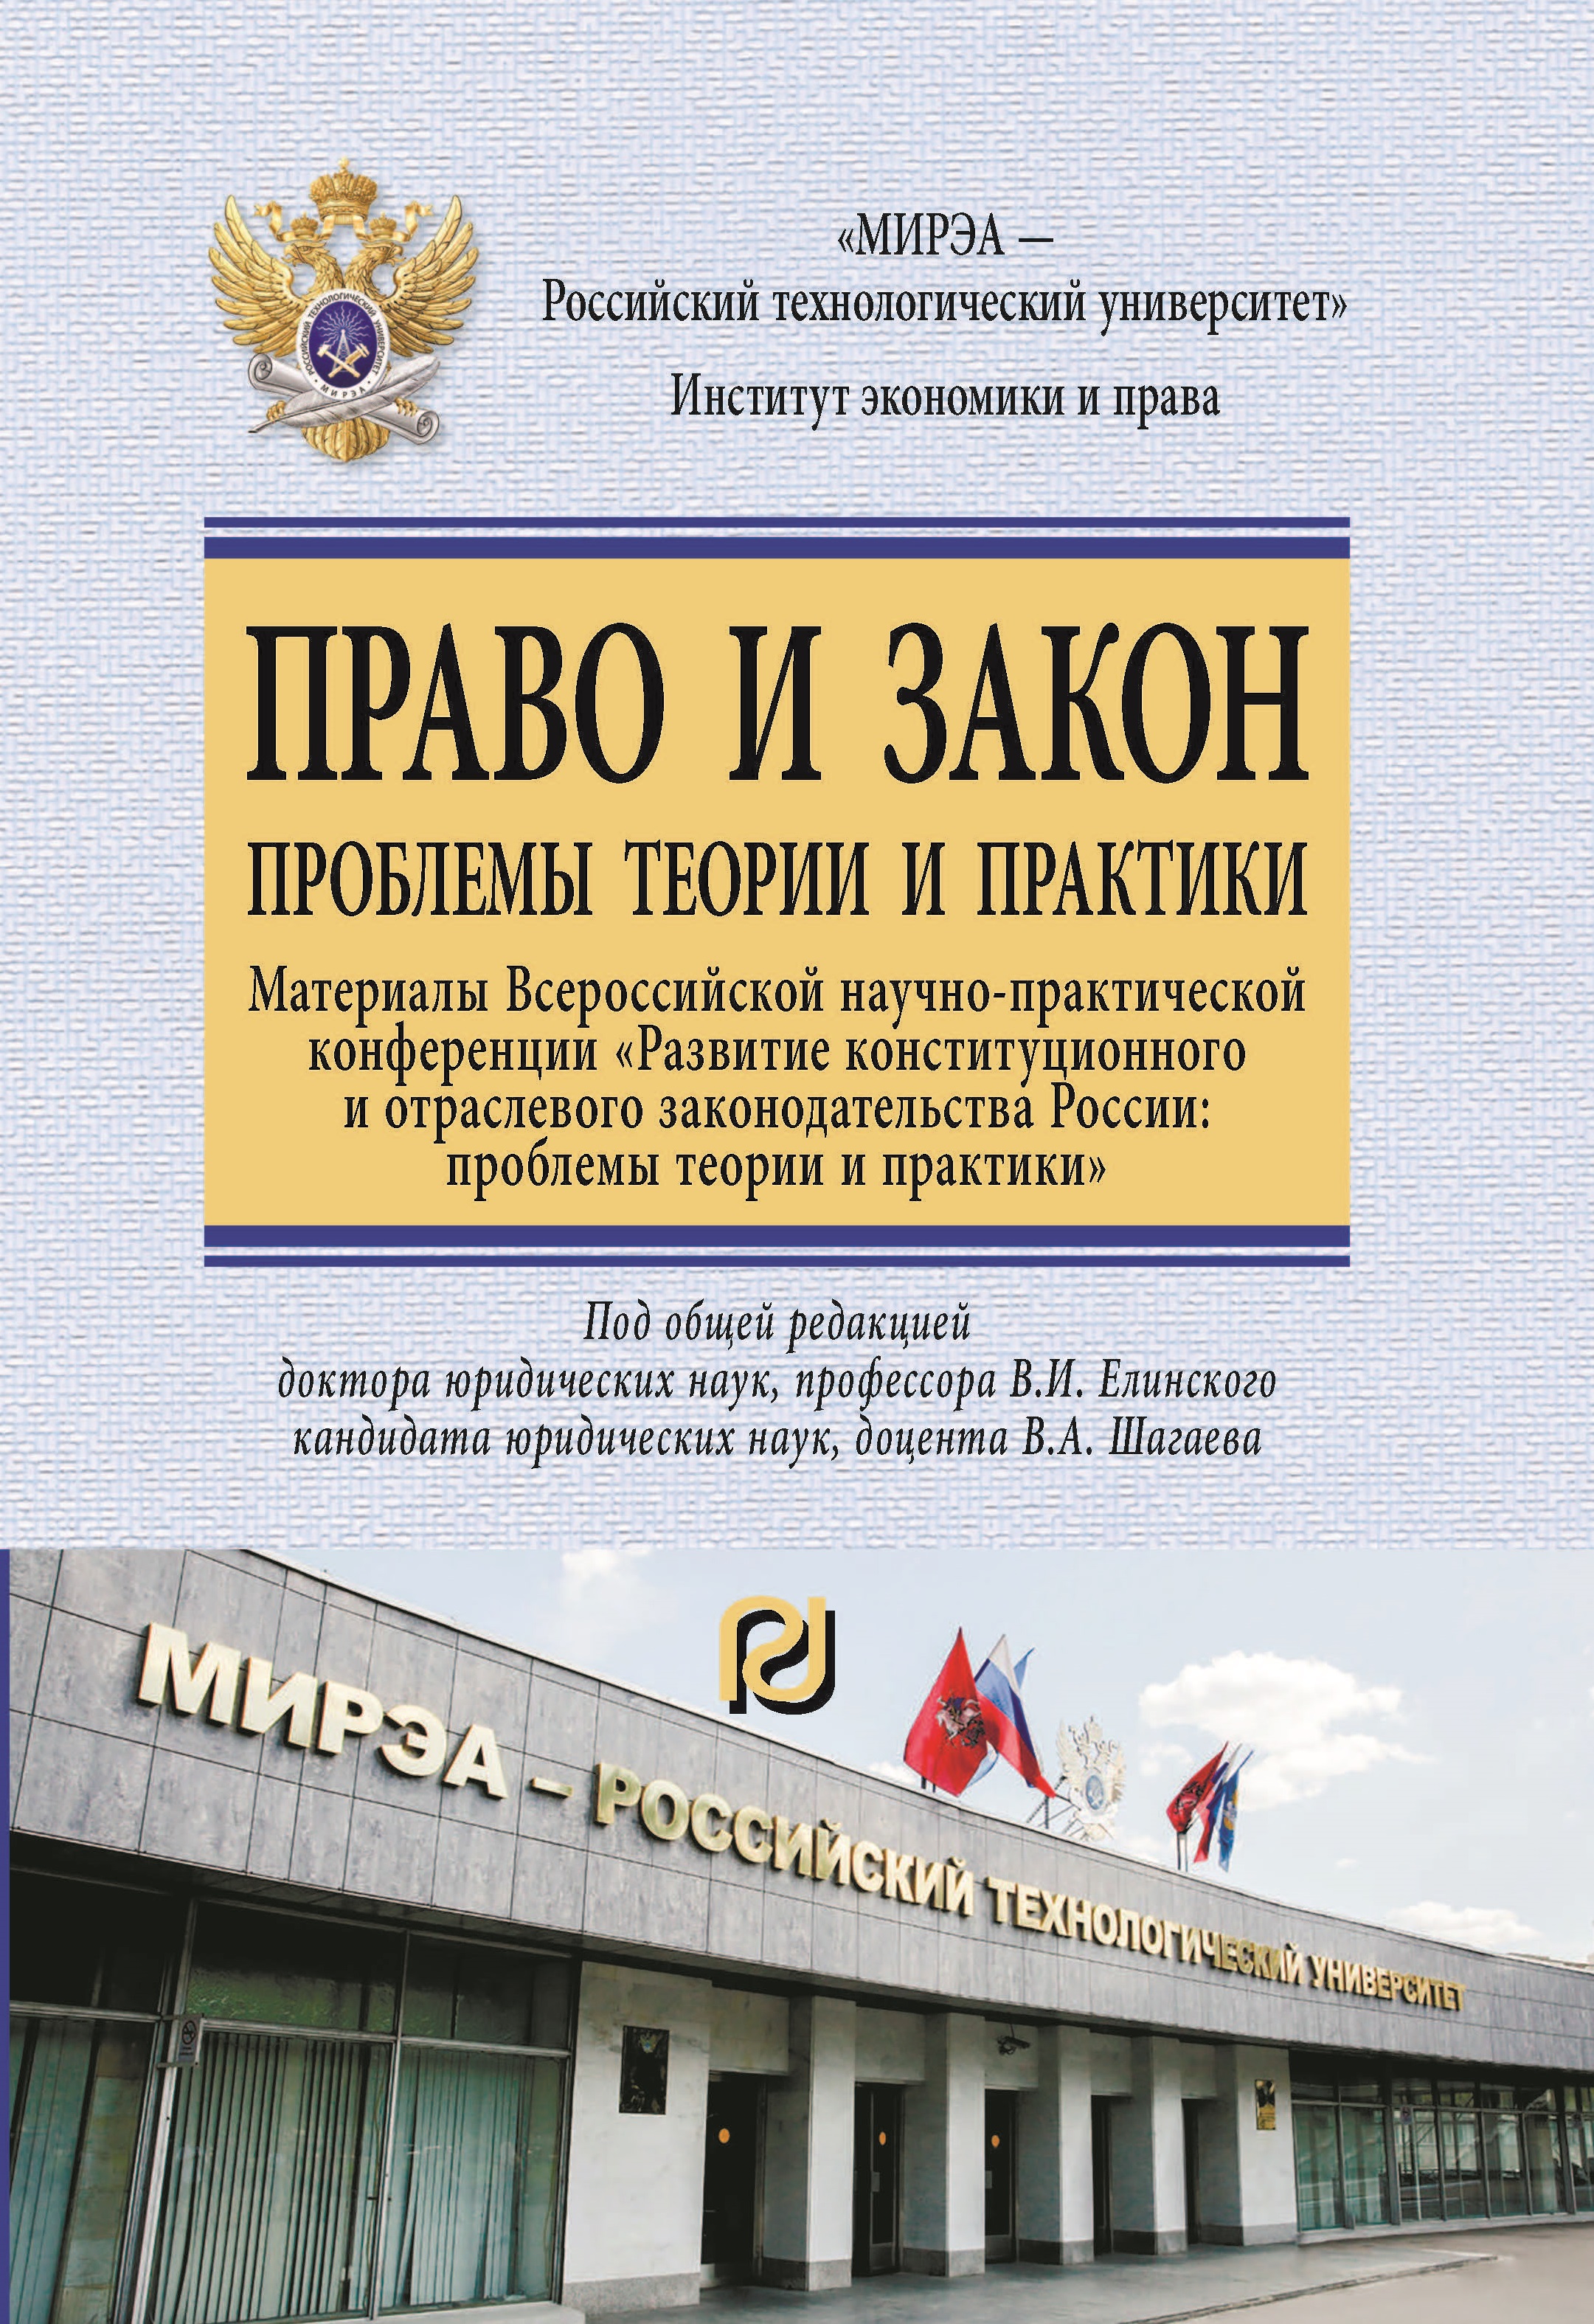                         WAYS OF INCREASE OF EFFICIENCY OF REALISATION THE CONSTITUTIONAL PRINCIPLE OF UNITY OF THE STATE POWER SYSTEM IN RUSSIA
            